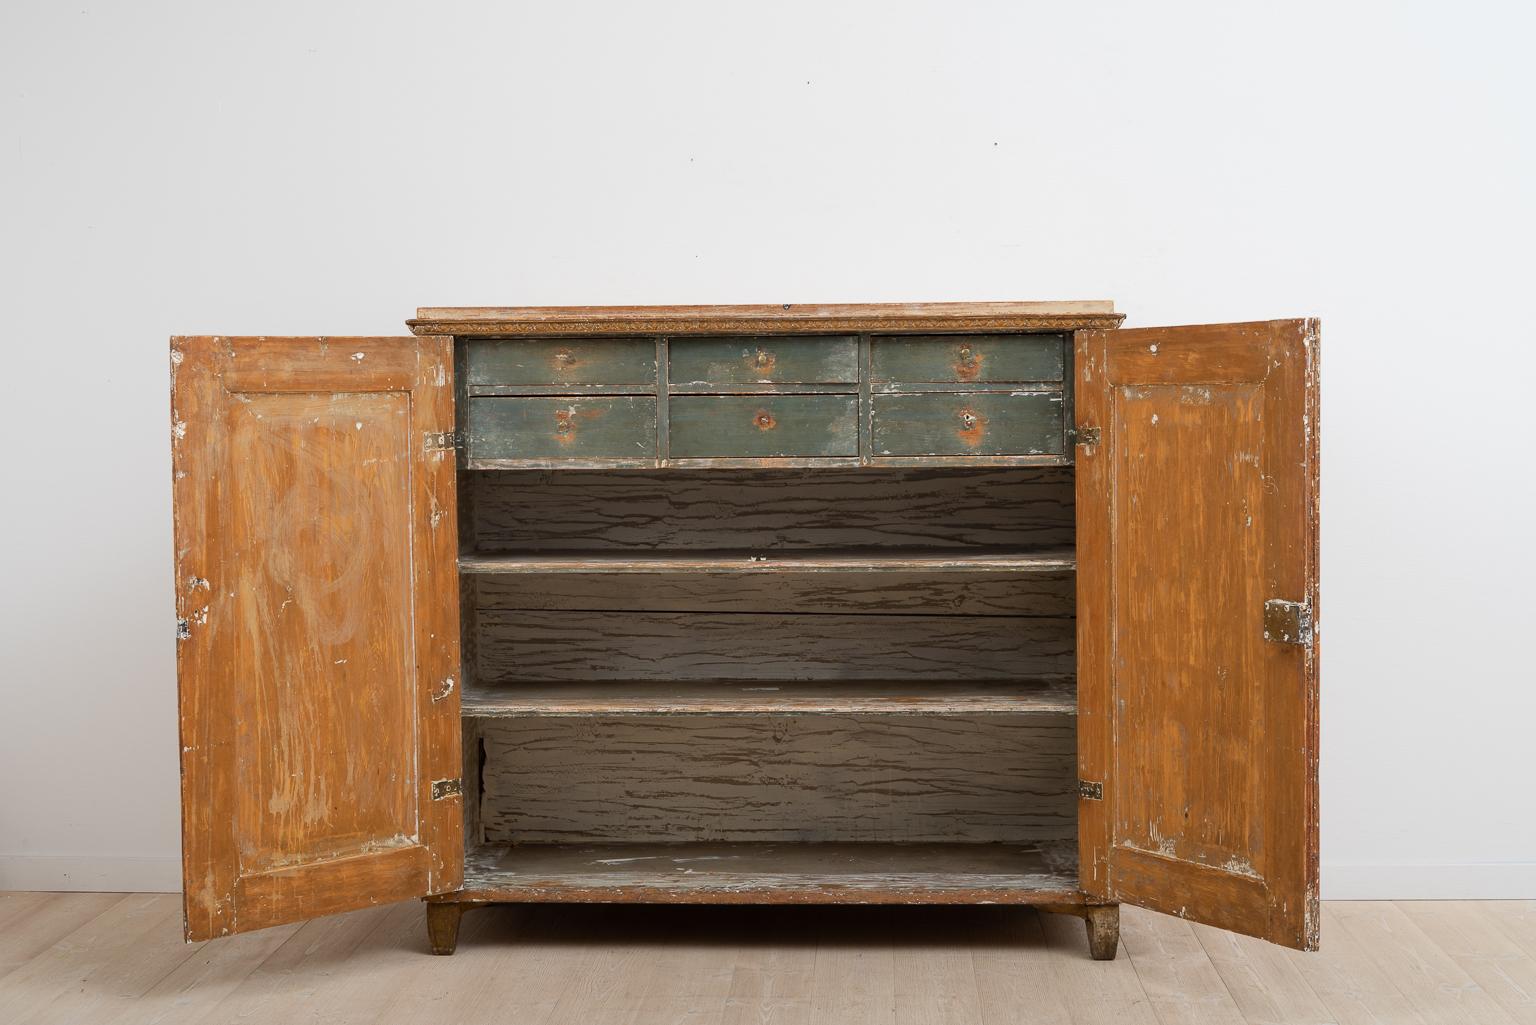 Hand-Painted Gustavian Sideboard with Rustic Patina Manufactured, 1790